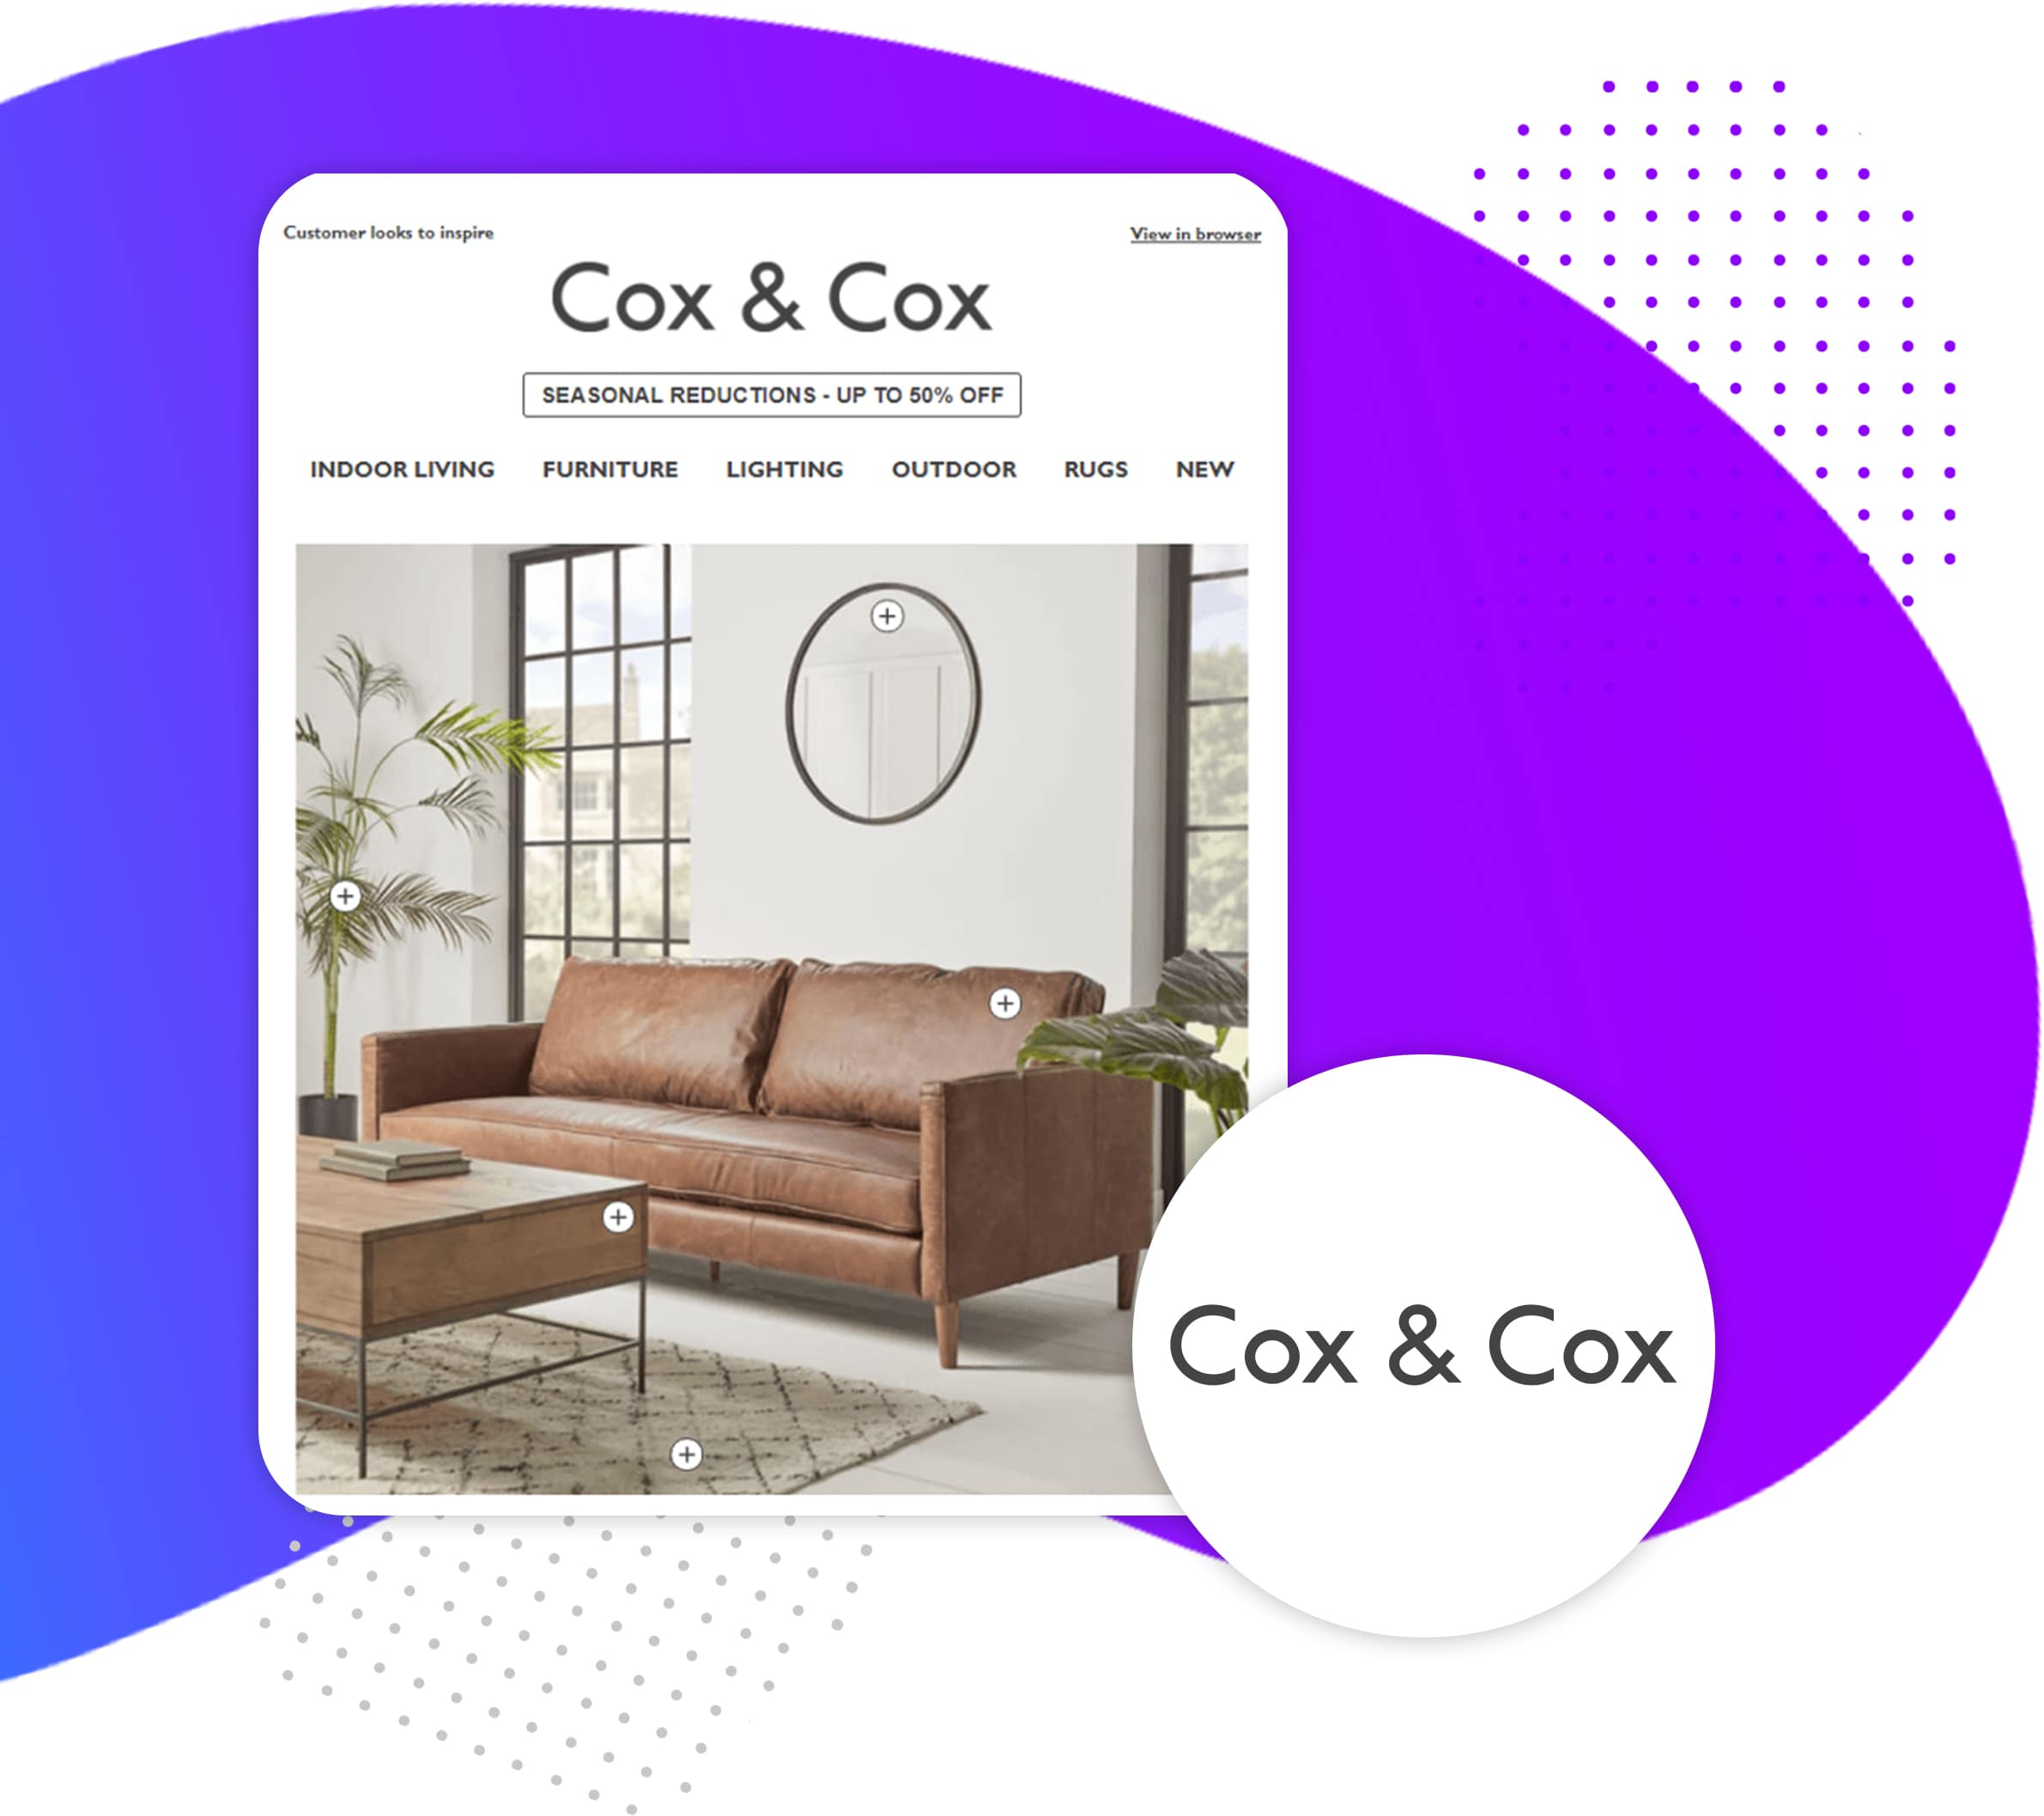 Cox & Cox logo and interactive email